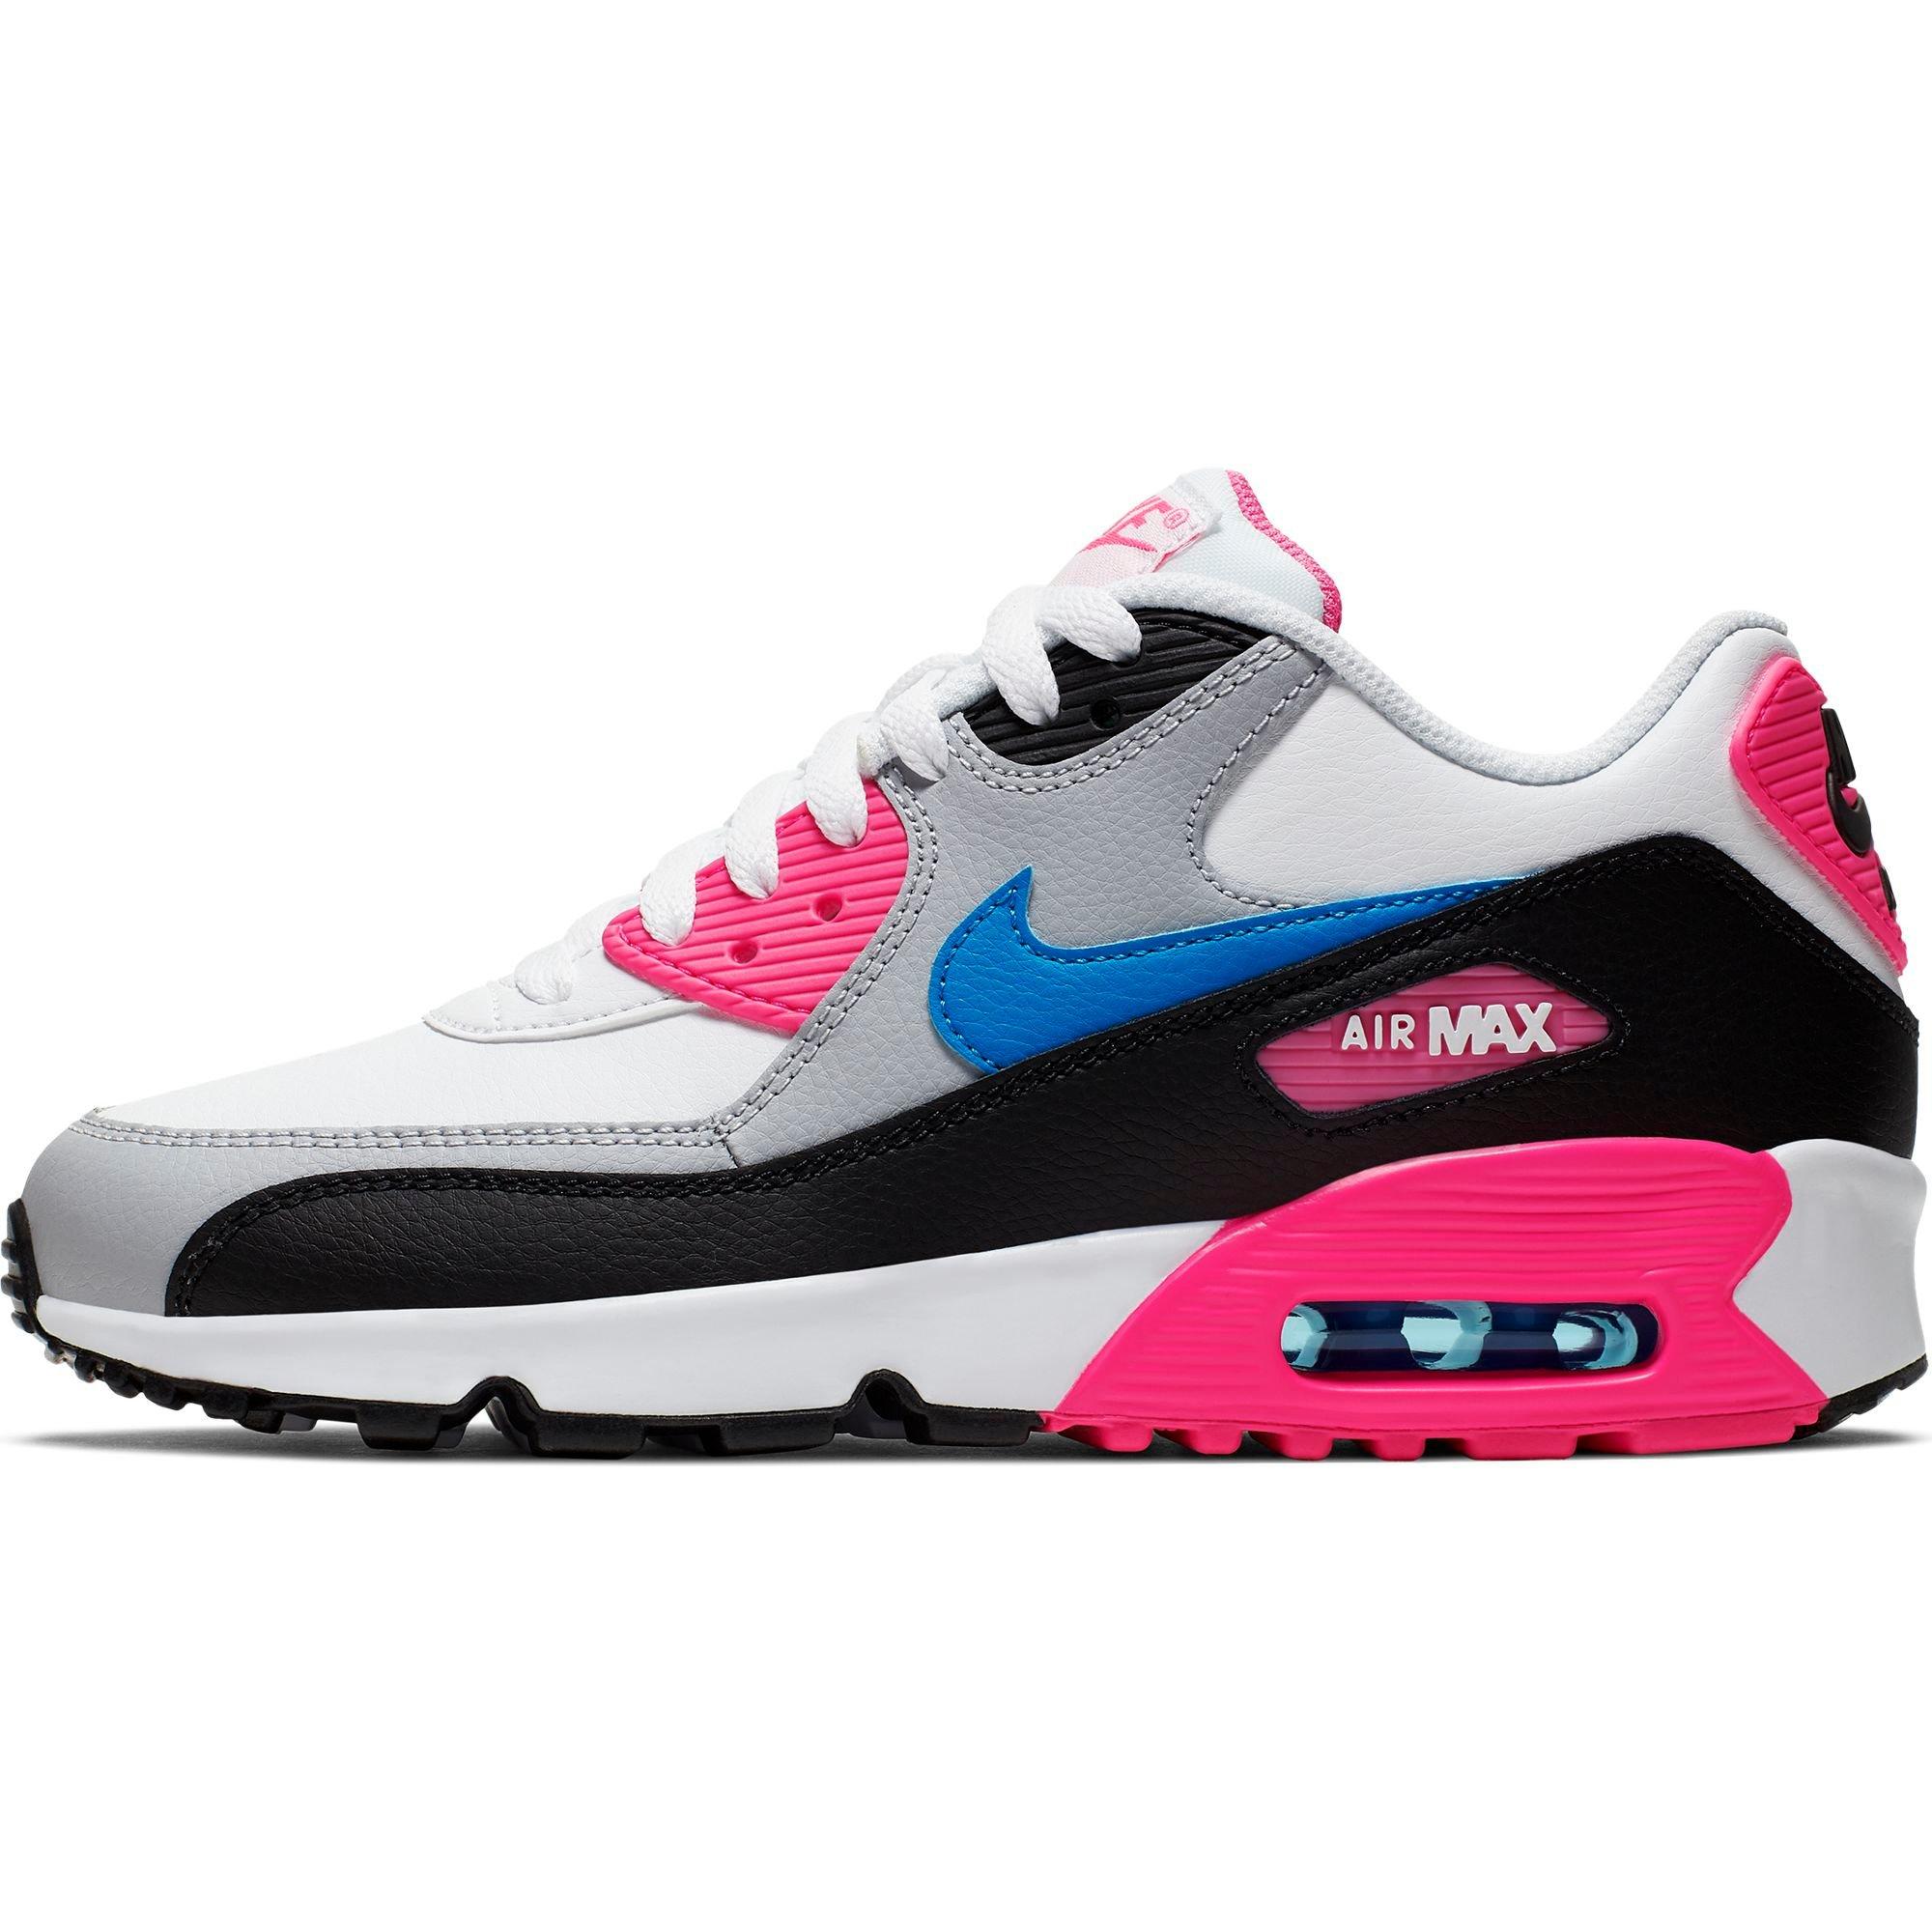 nike air max pink blue and white